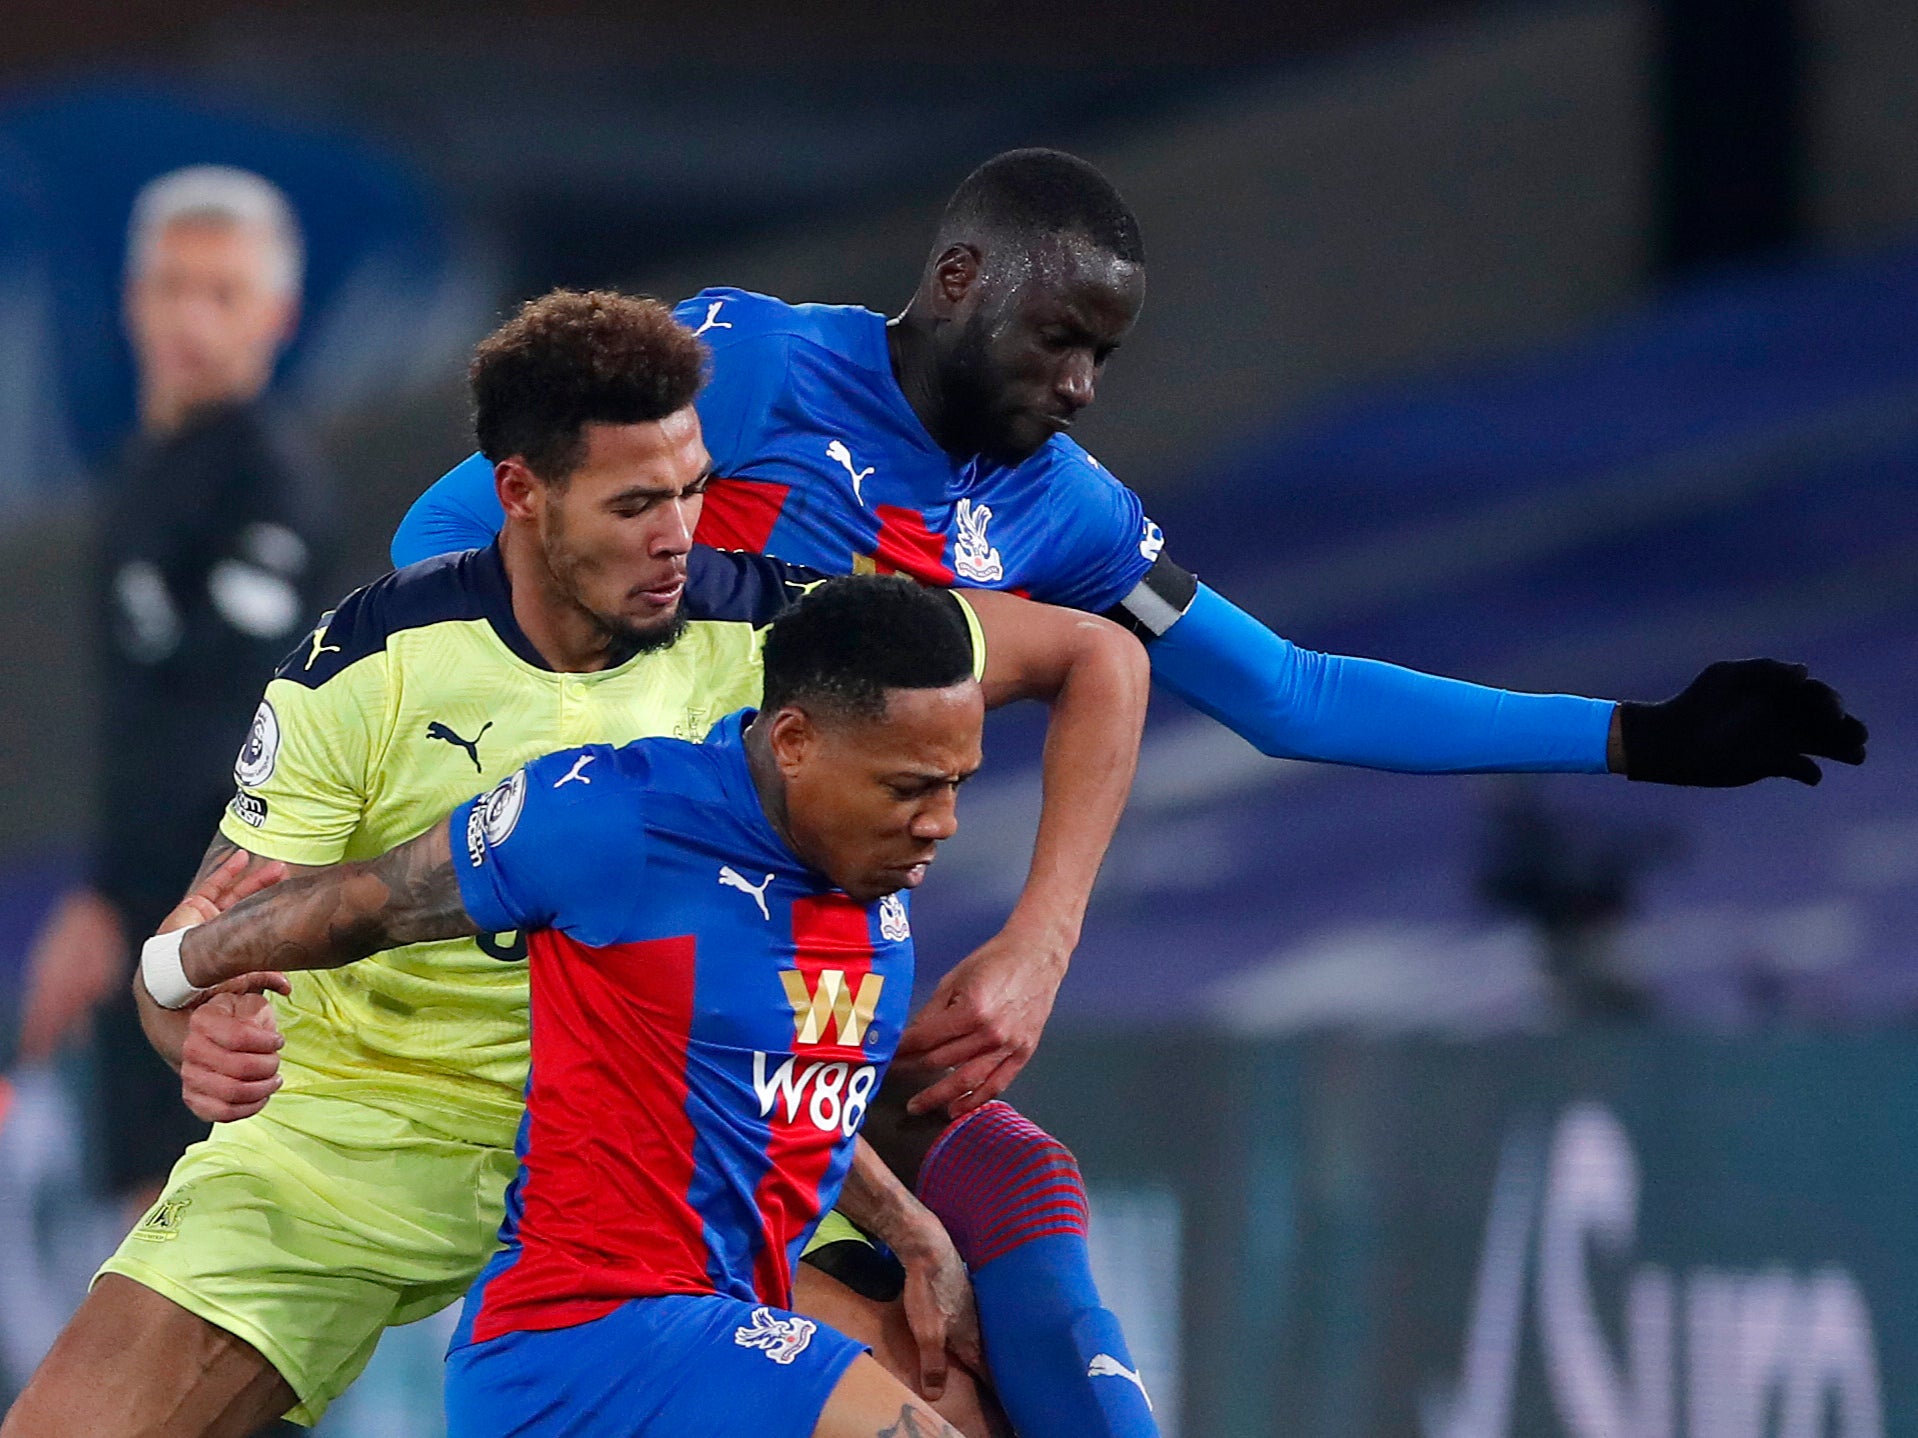 Newcastle emerged victorious when they last met Crystal Palace